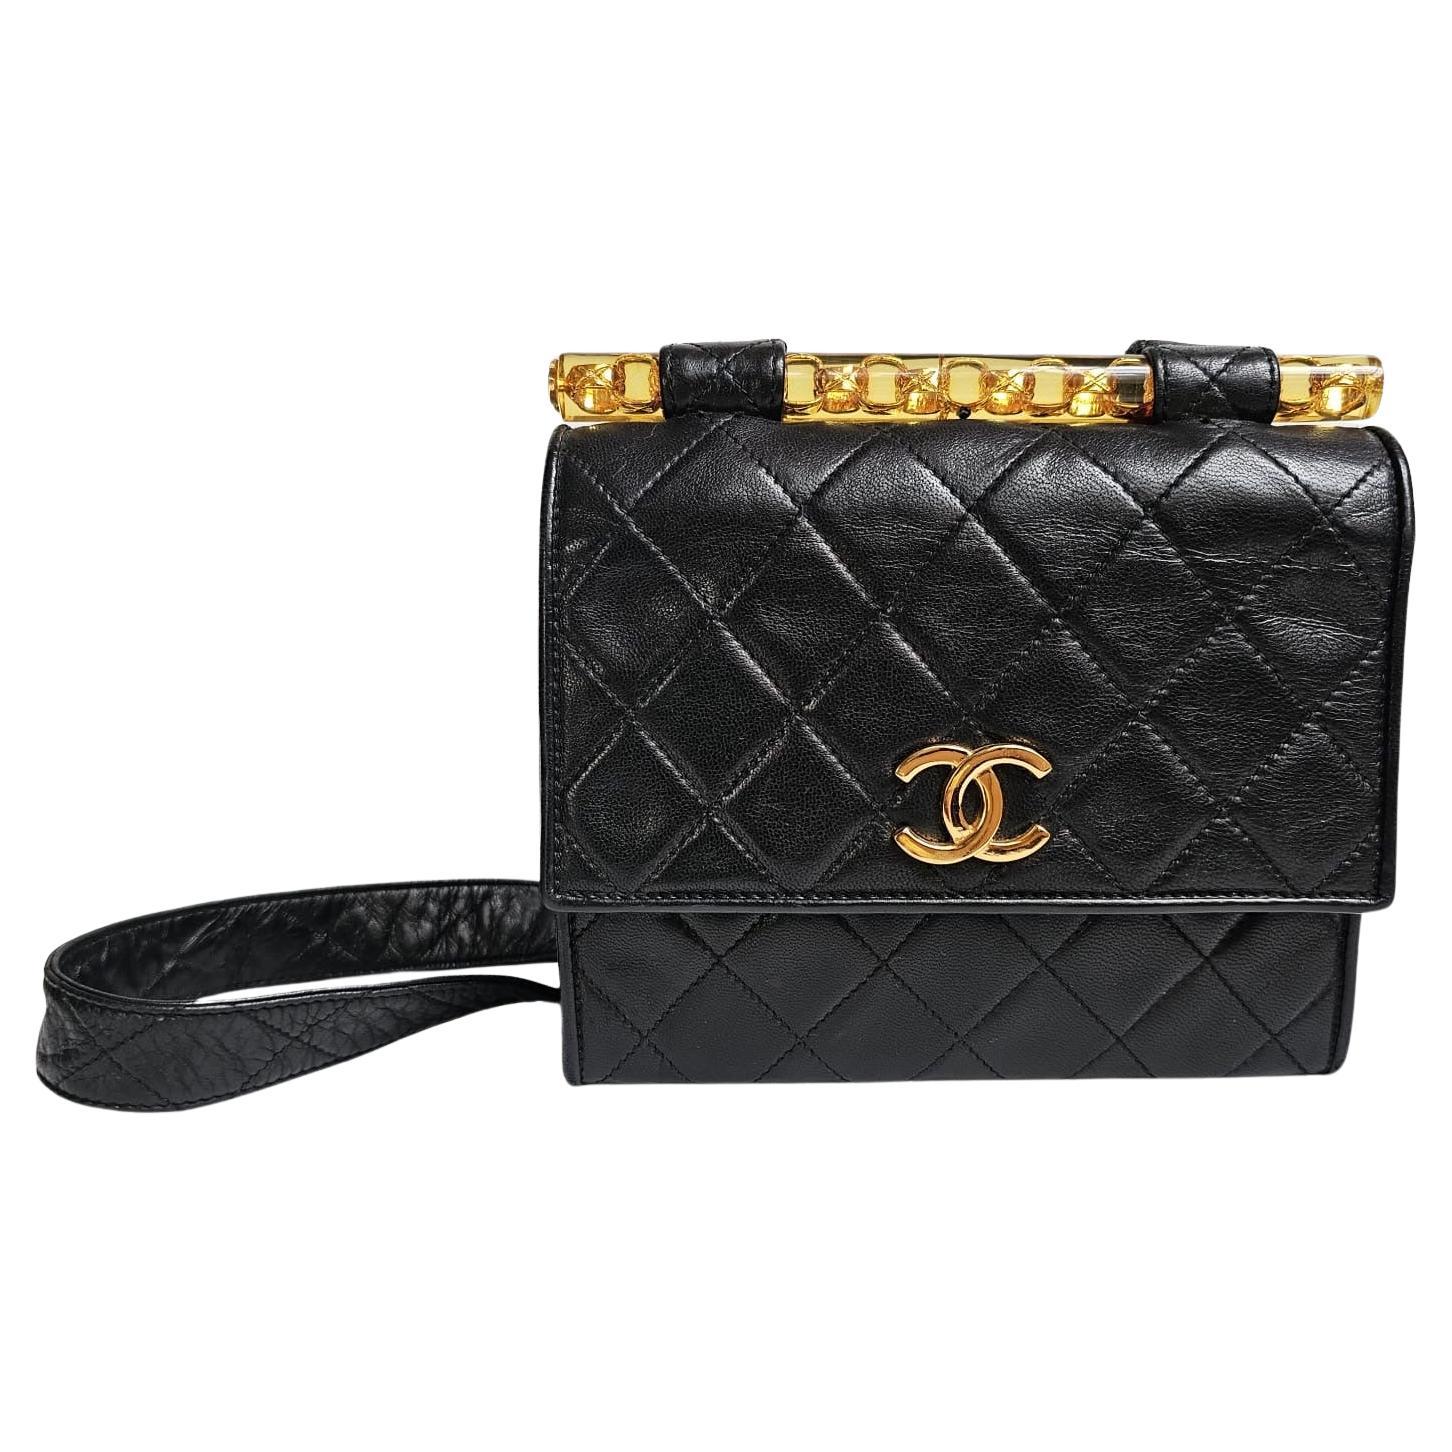 How do I store Chanel Boy bags?